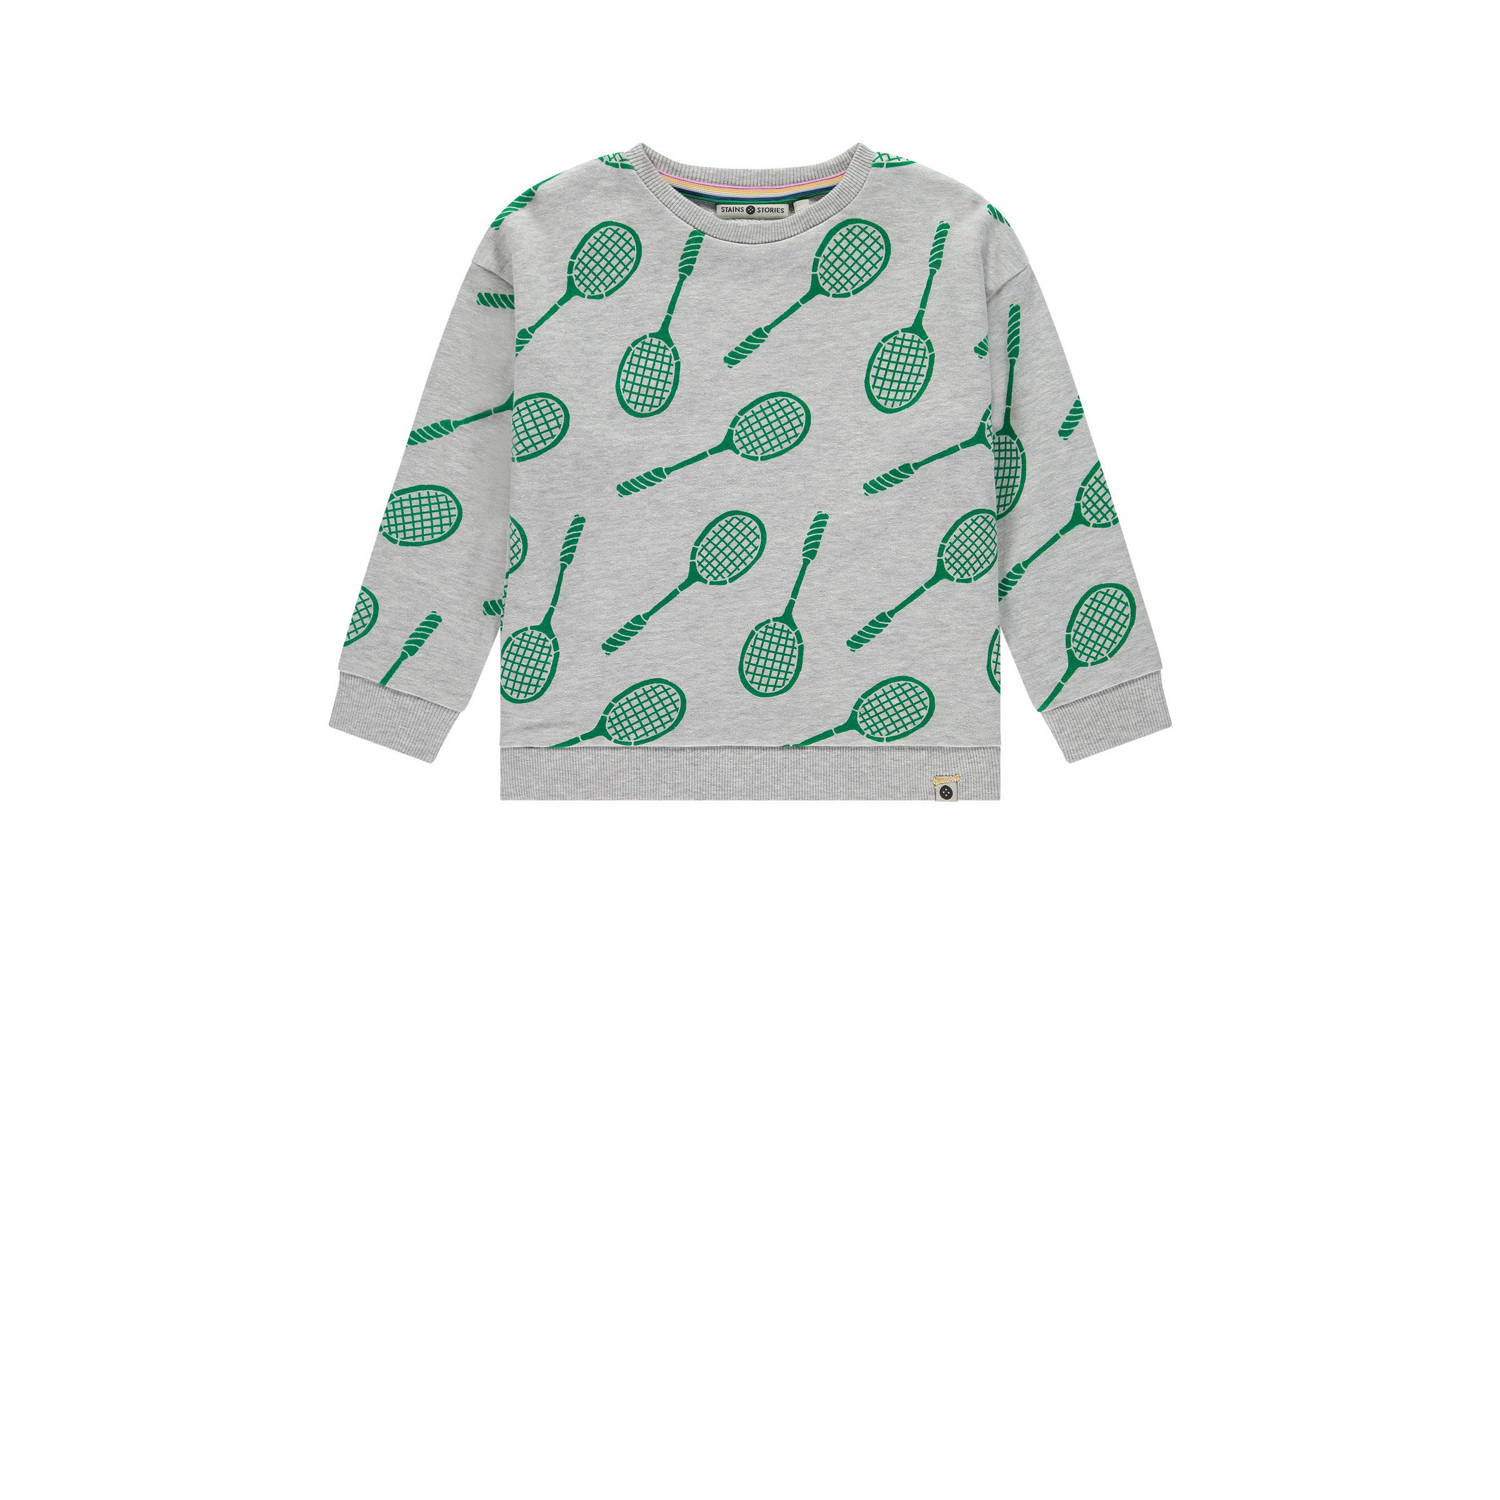 Stains&Stories sweater met all over print grijs groen All over print 104